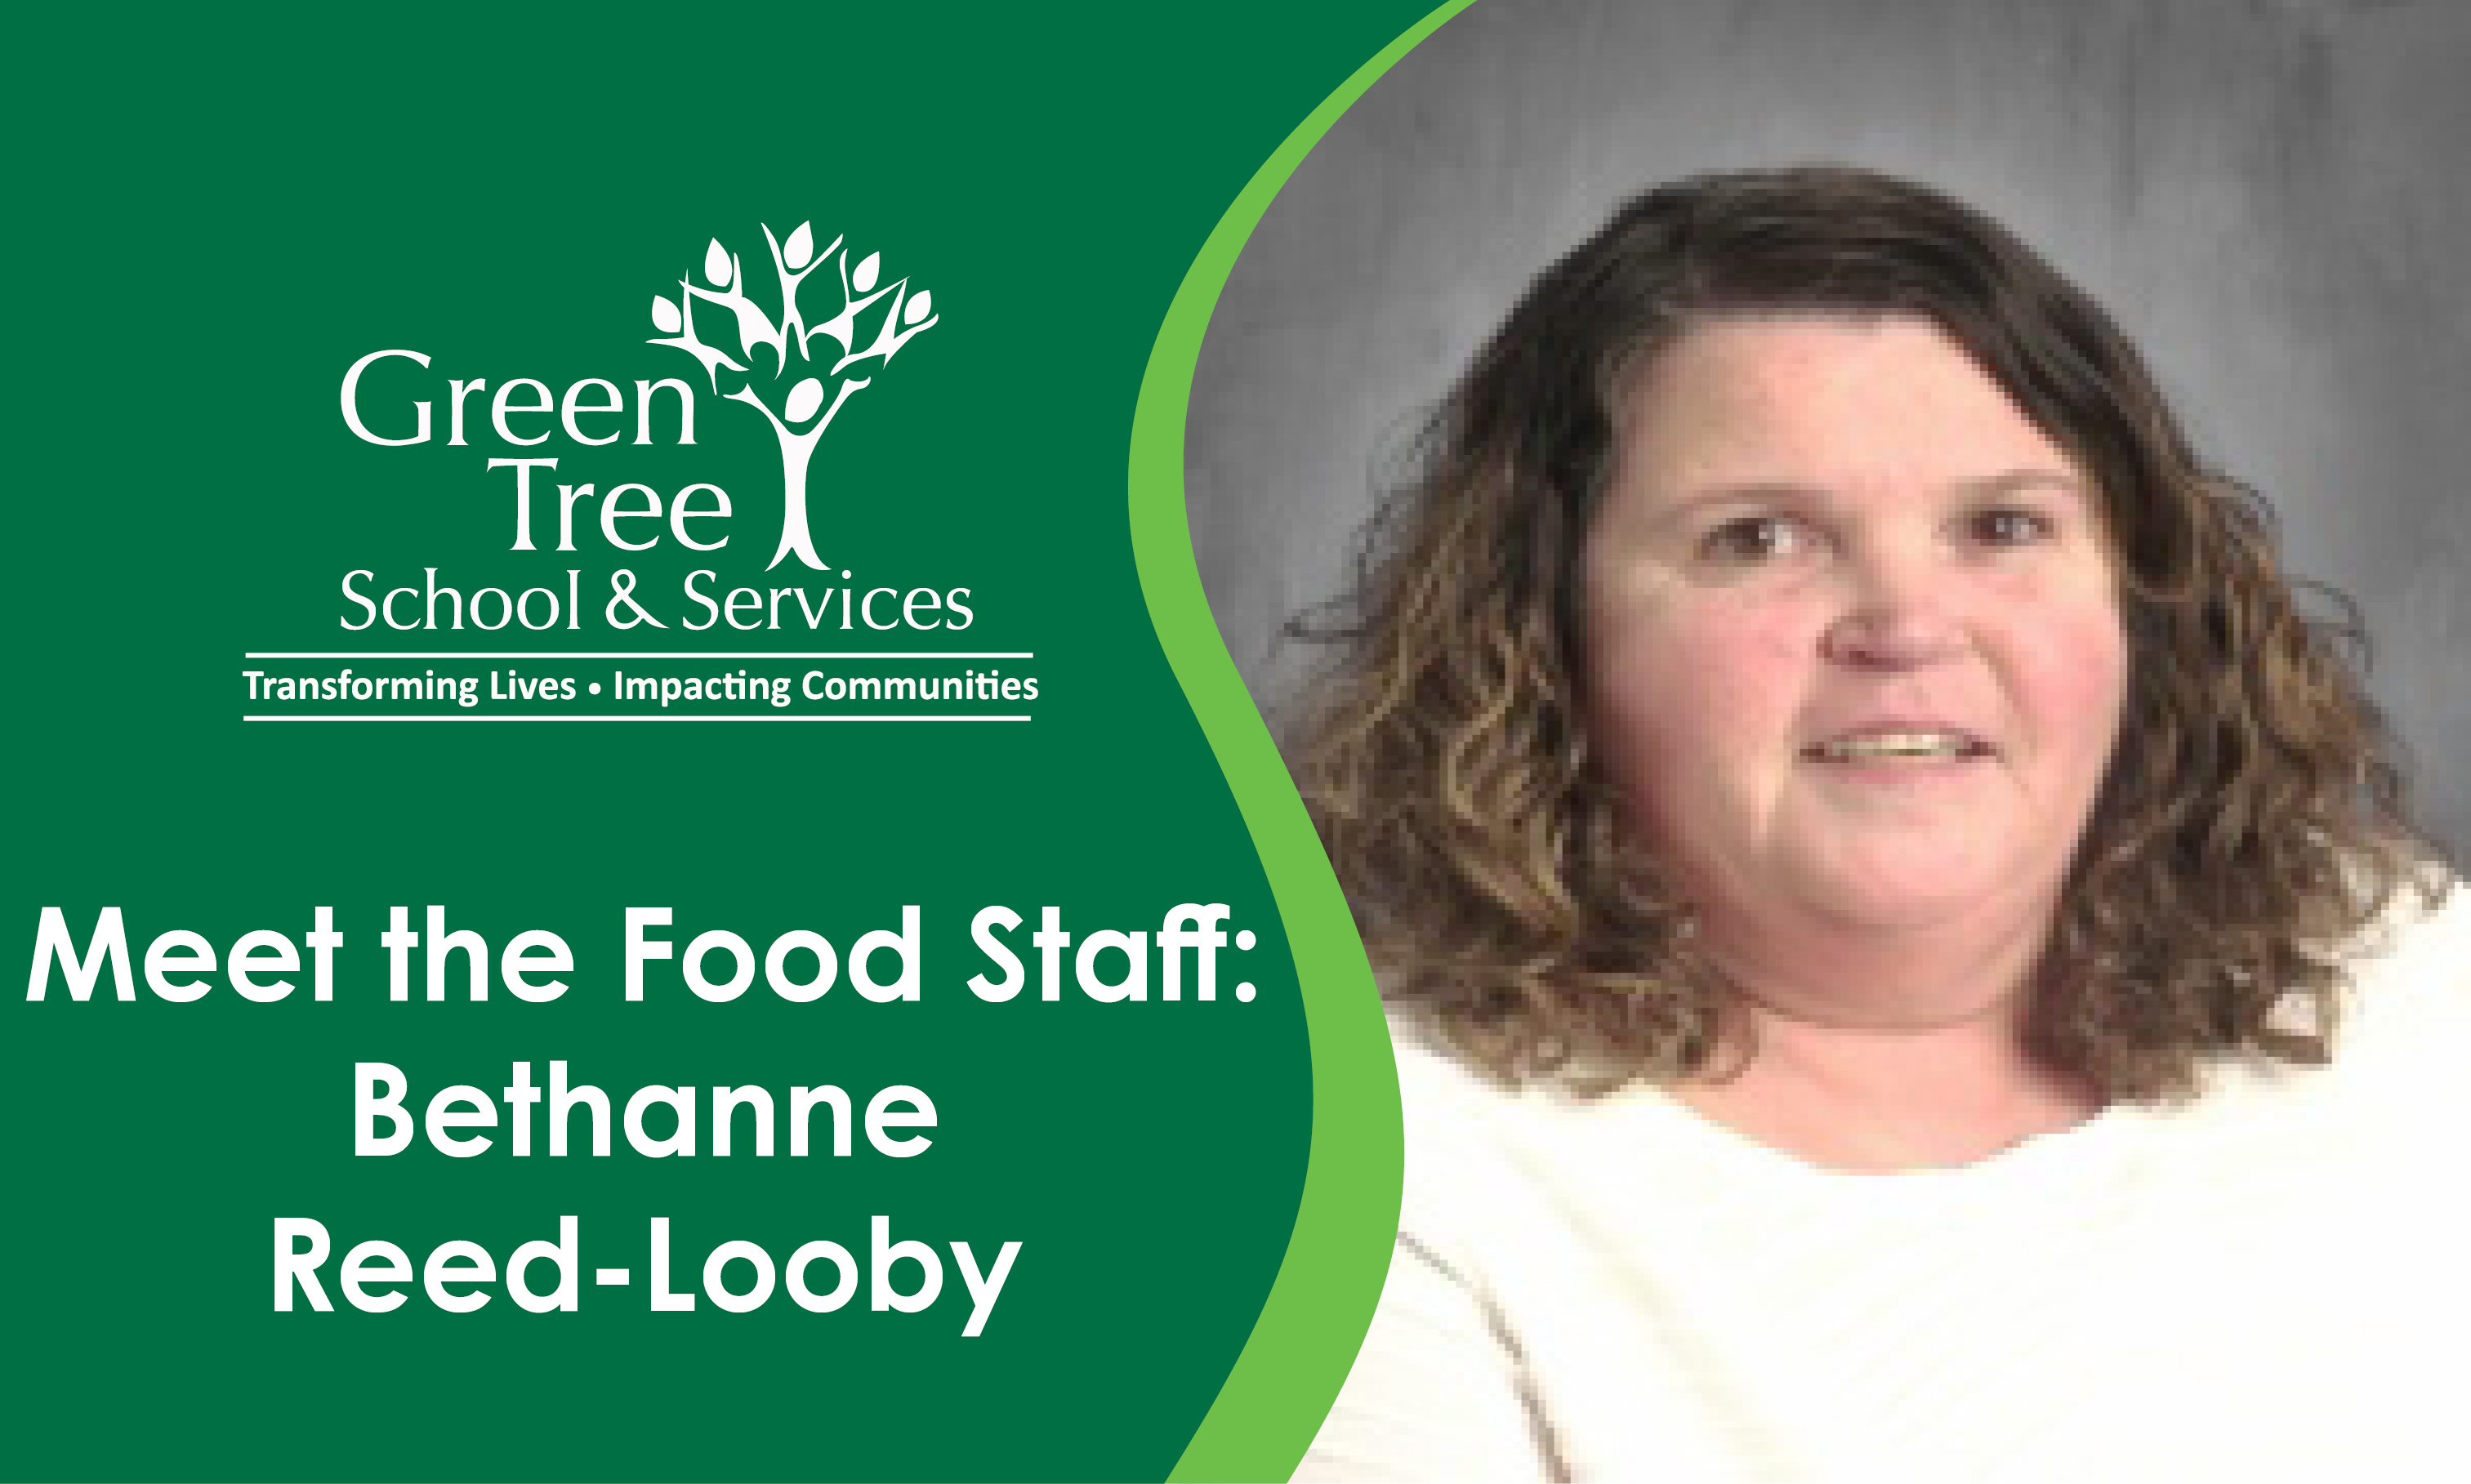 Meet the Food Staff: Bethanne Reed-Looby